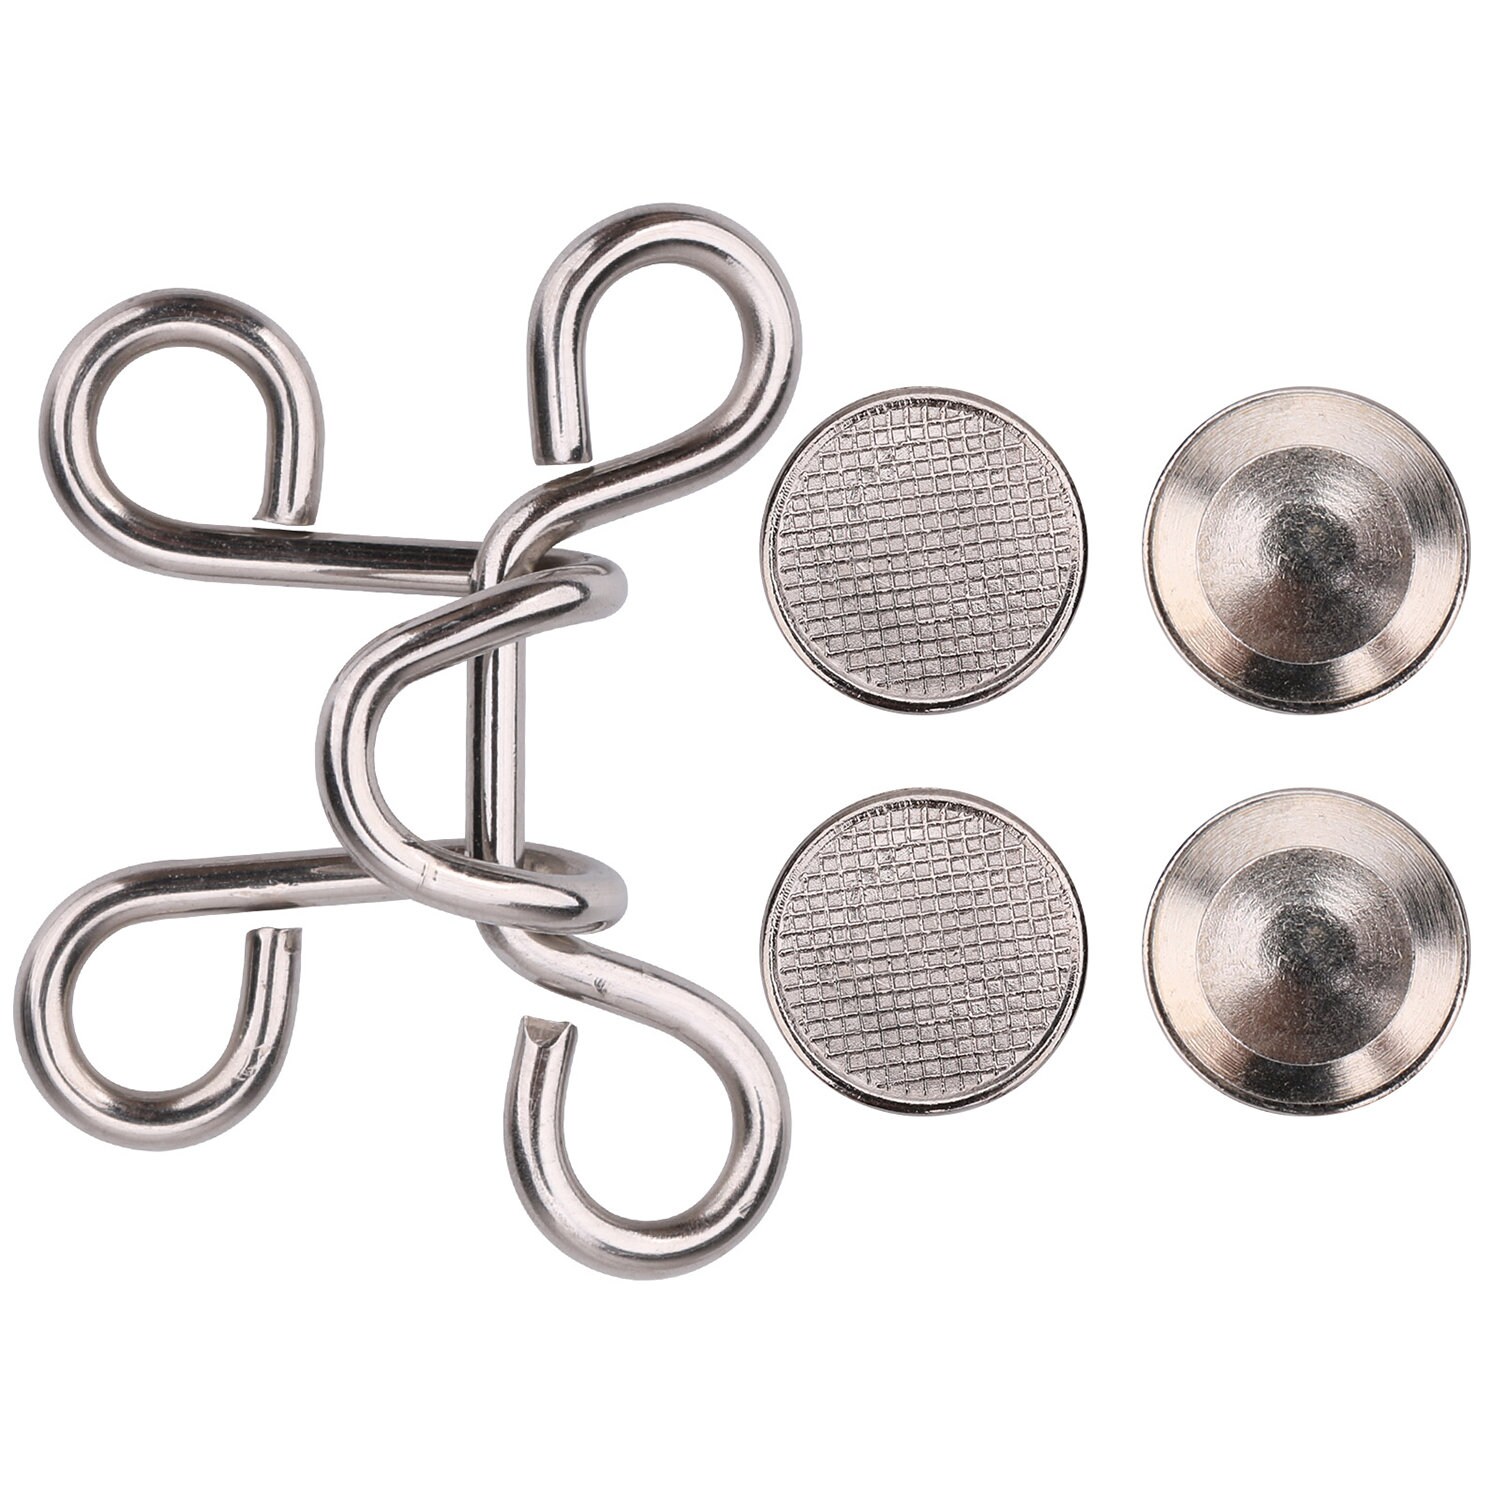 Nail-free Adjustable Snap Button With Rivets Set of 4 No-sew Waist